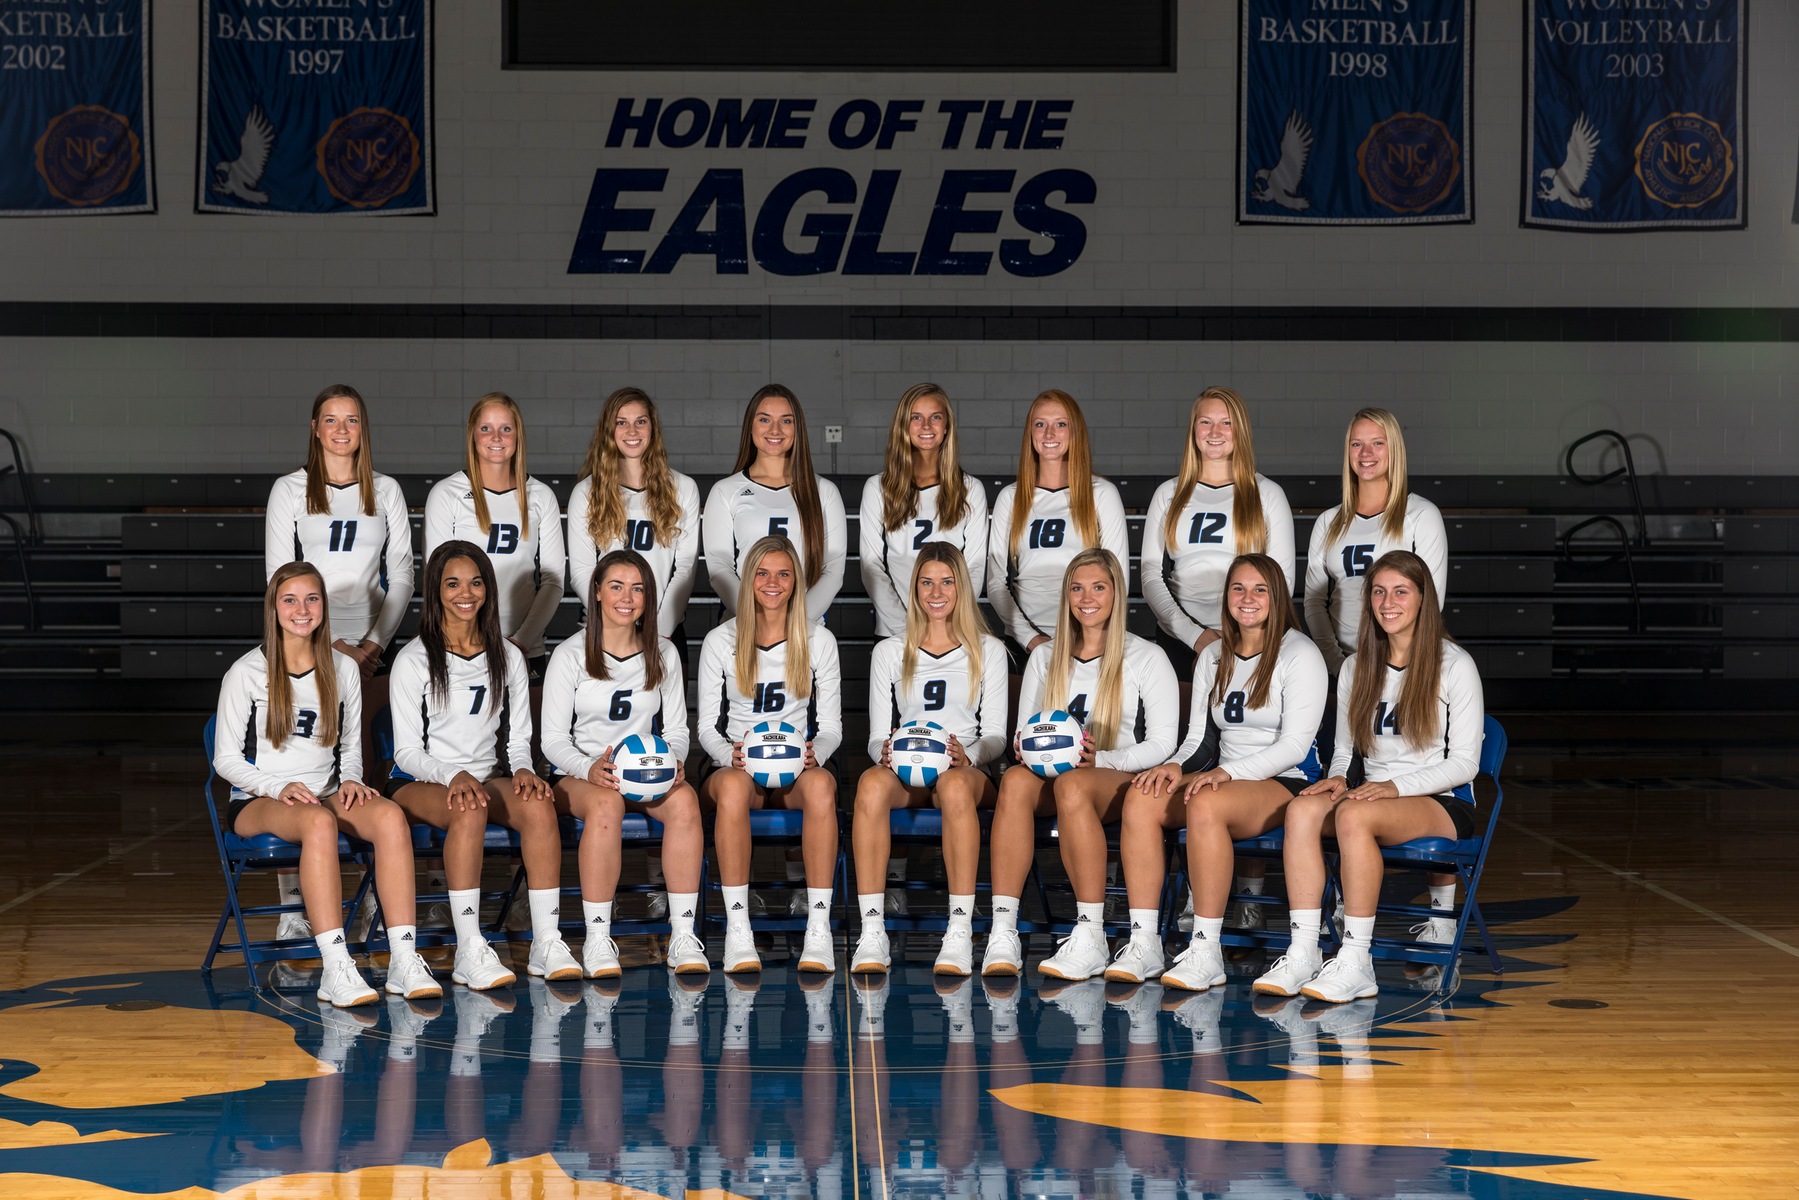 KCC volleyball team headed to nationals